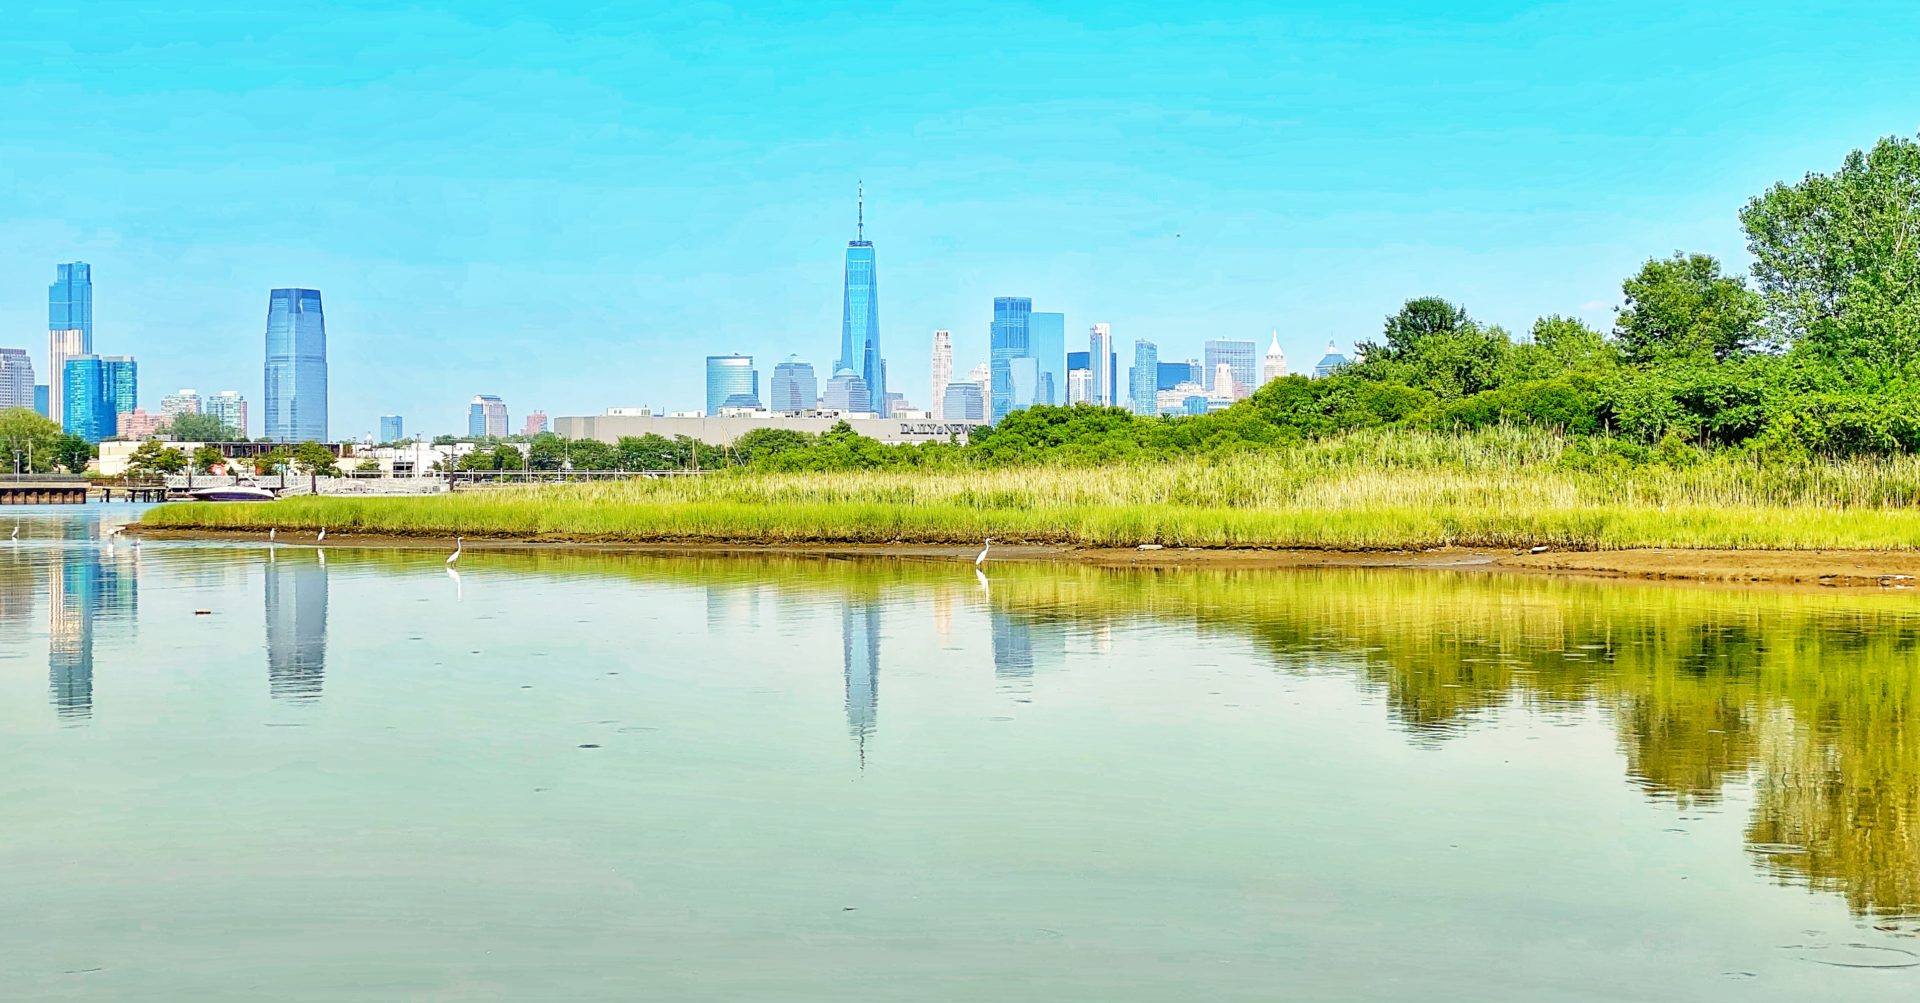 Caven Point in Liberty State Park, Jersey City